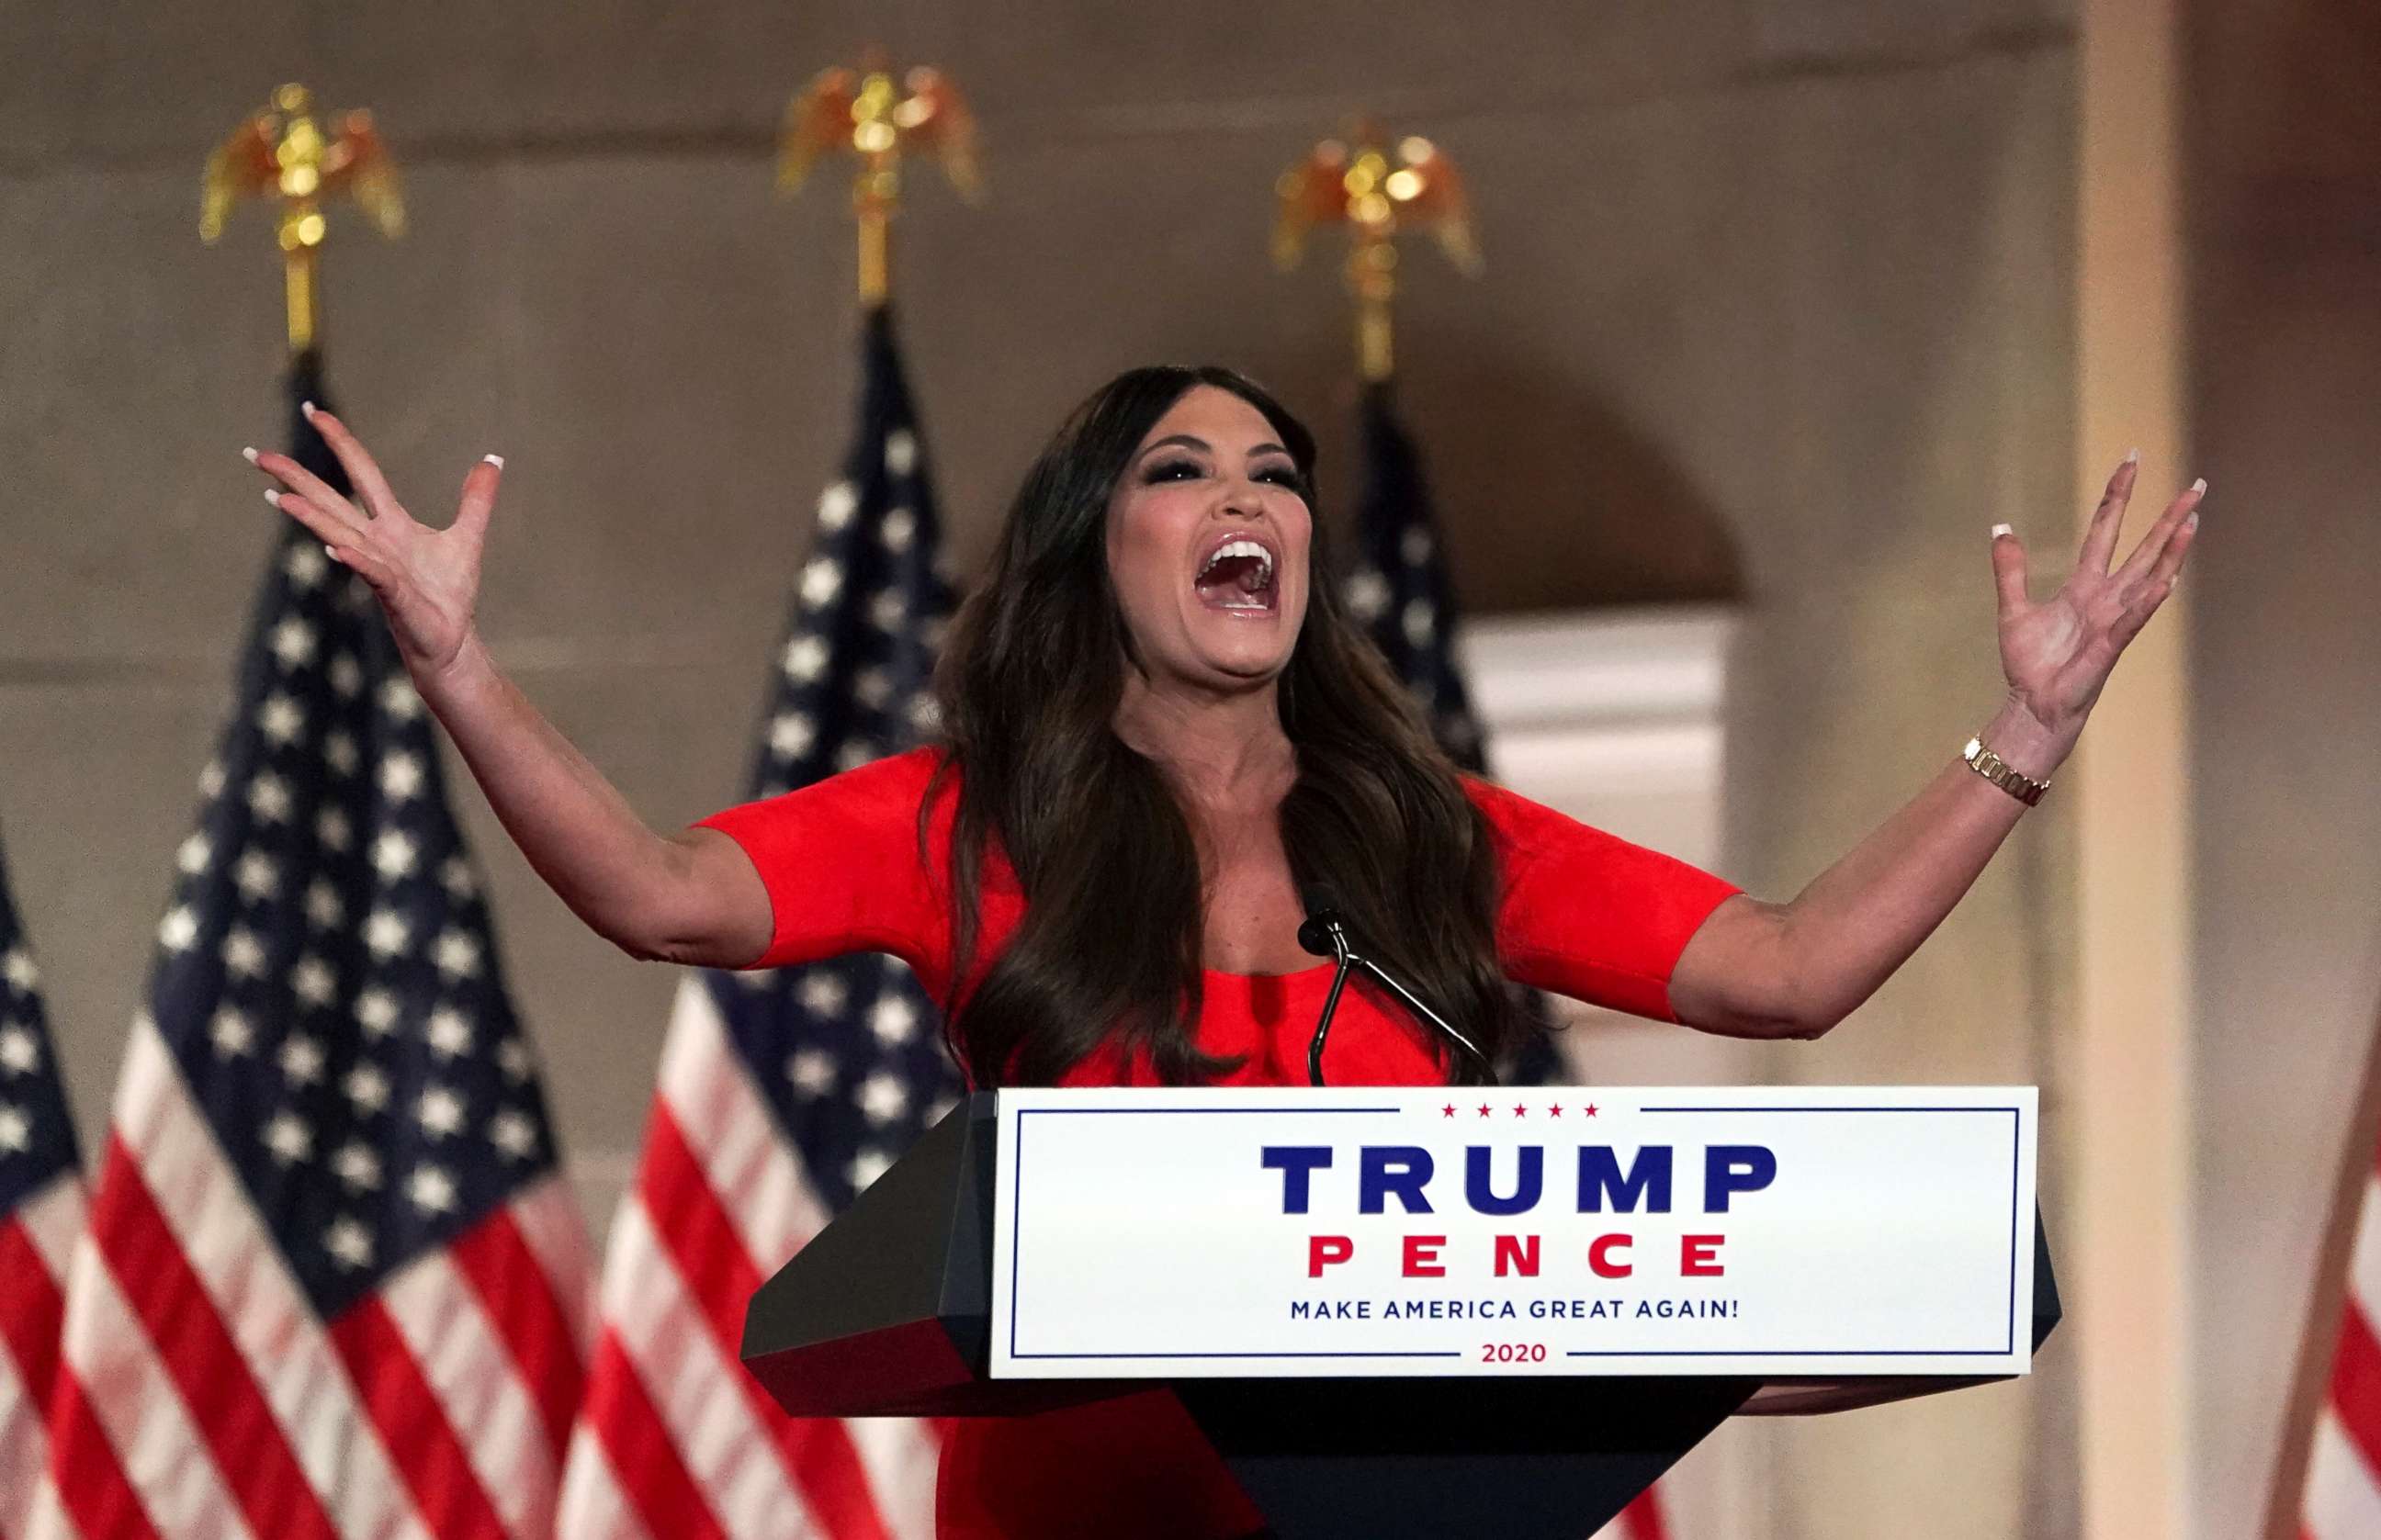 PHOTO: Kimberly Guilfoyle, the National Chair of the "Trump Victory Finance Committee" and girlfriend of Donald Trump Jr., delivers a speech to the largely virtual 2020 Republican National Convention, from Washington, Aug. 24, 2020.